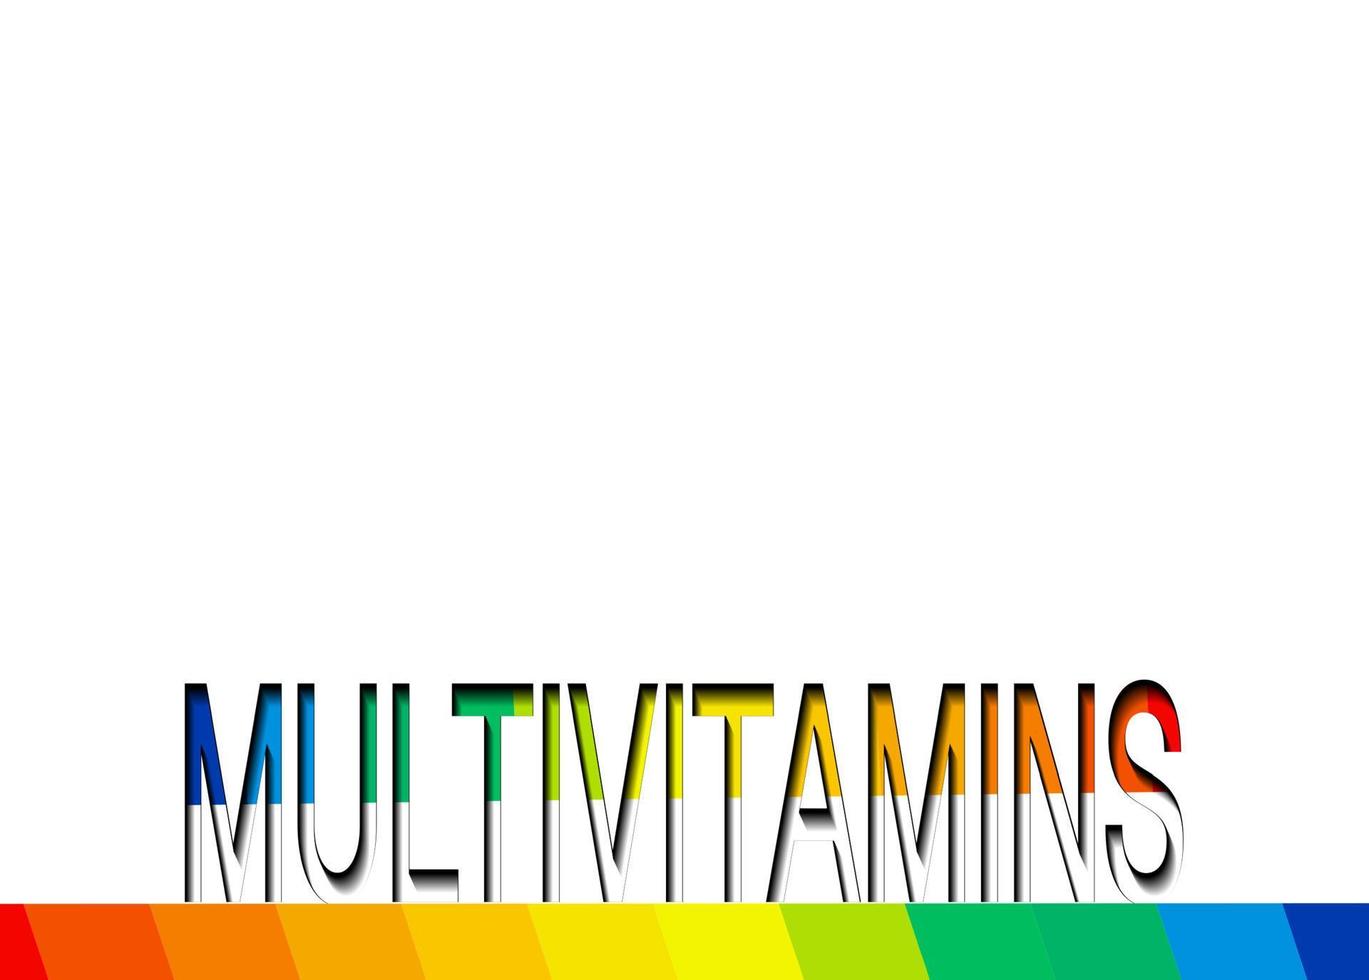 Multivitamin label inspiration, icon vitamins colorful text, banner vector isolated or white background